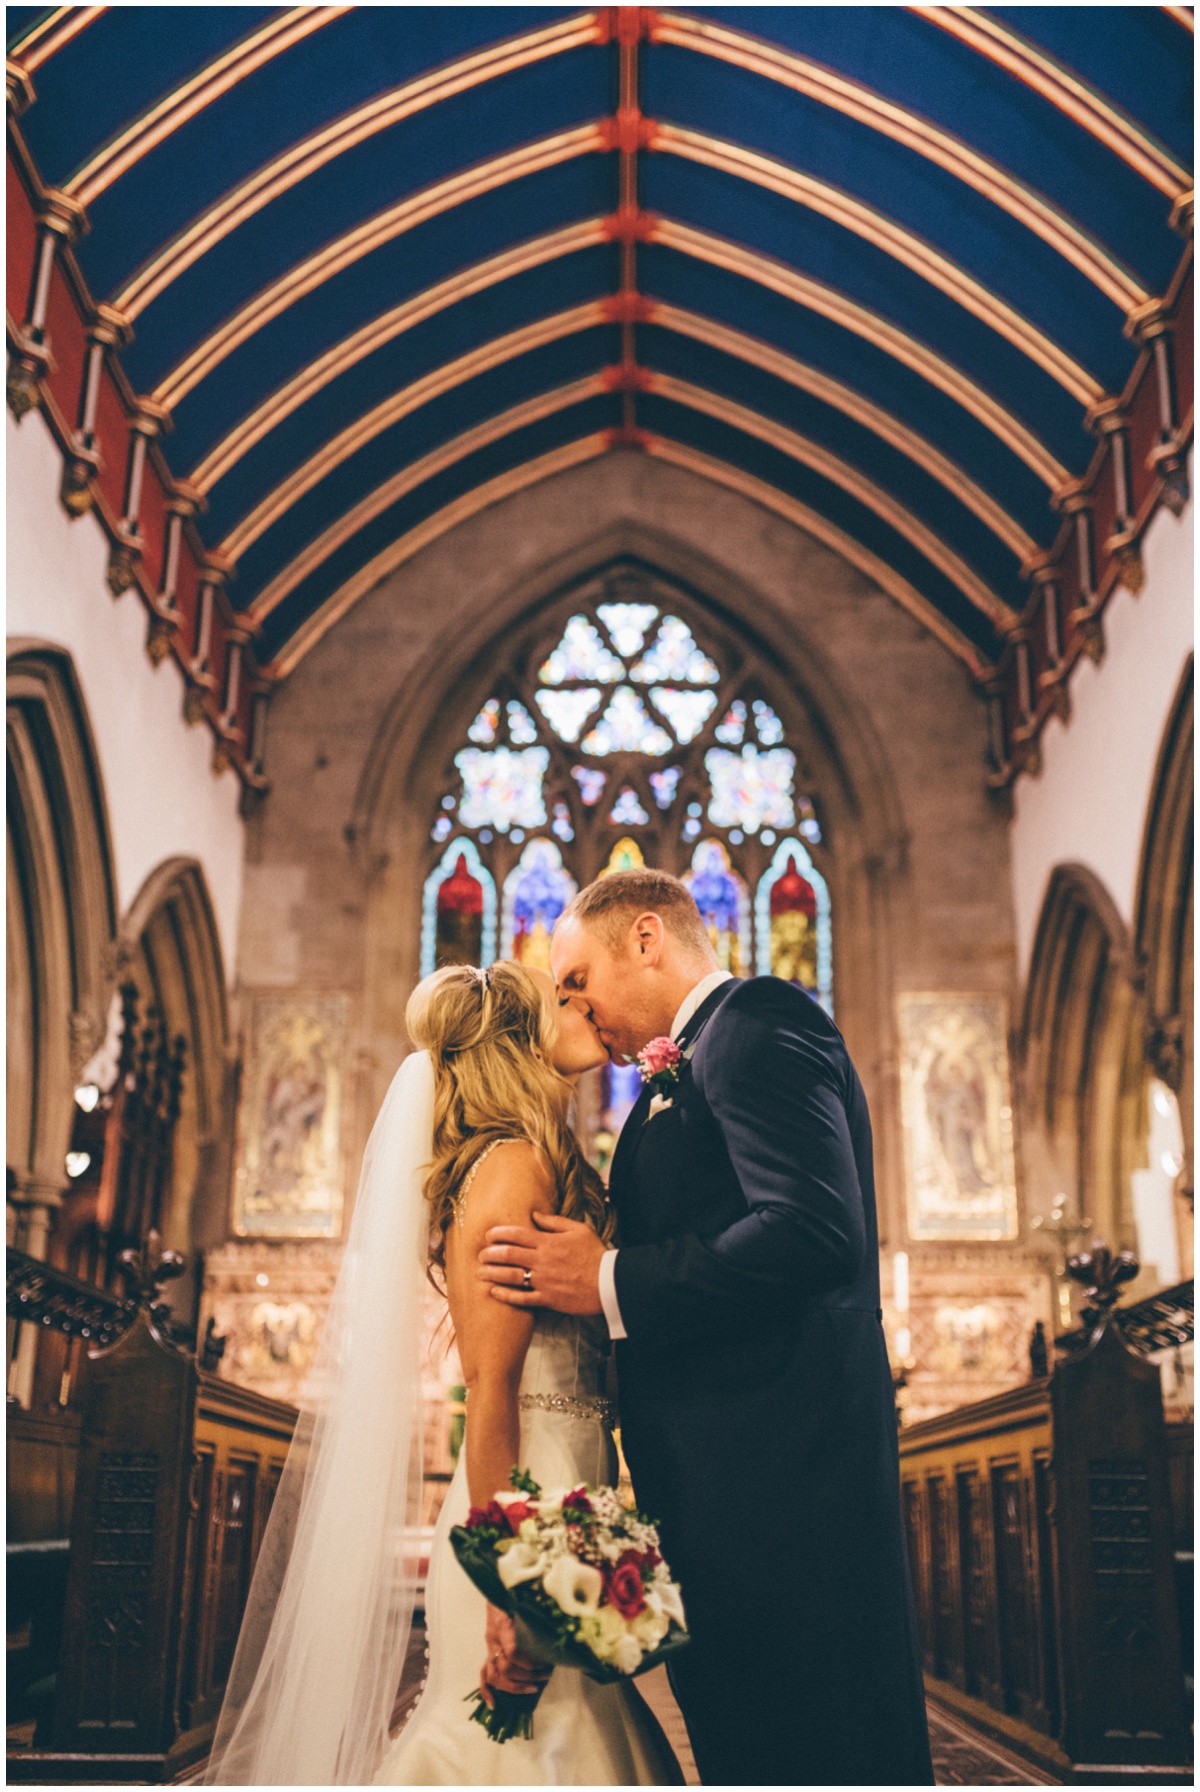 New husband and wife share their First Kiss at St Mark's Church in Worsley.